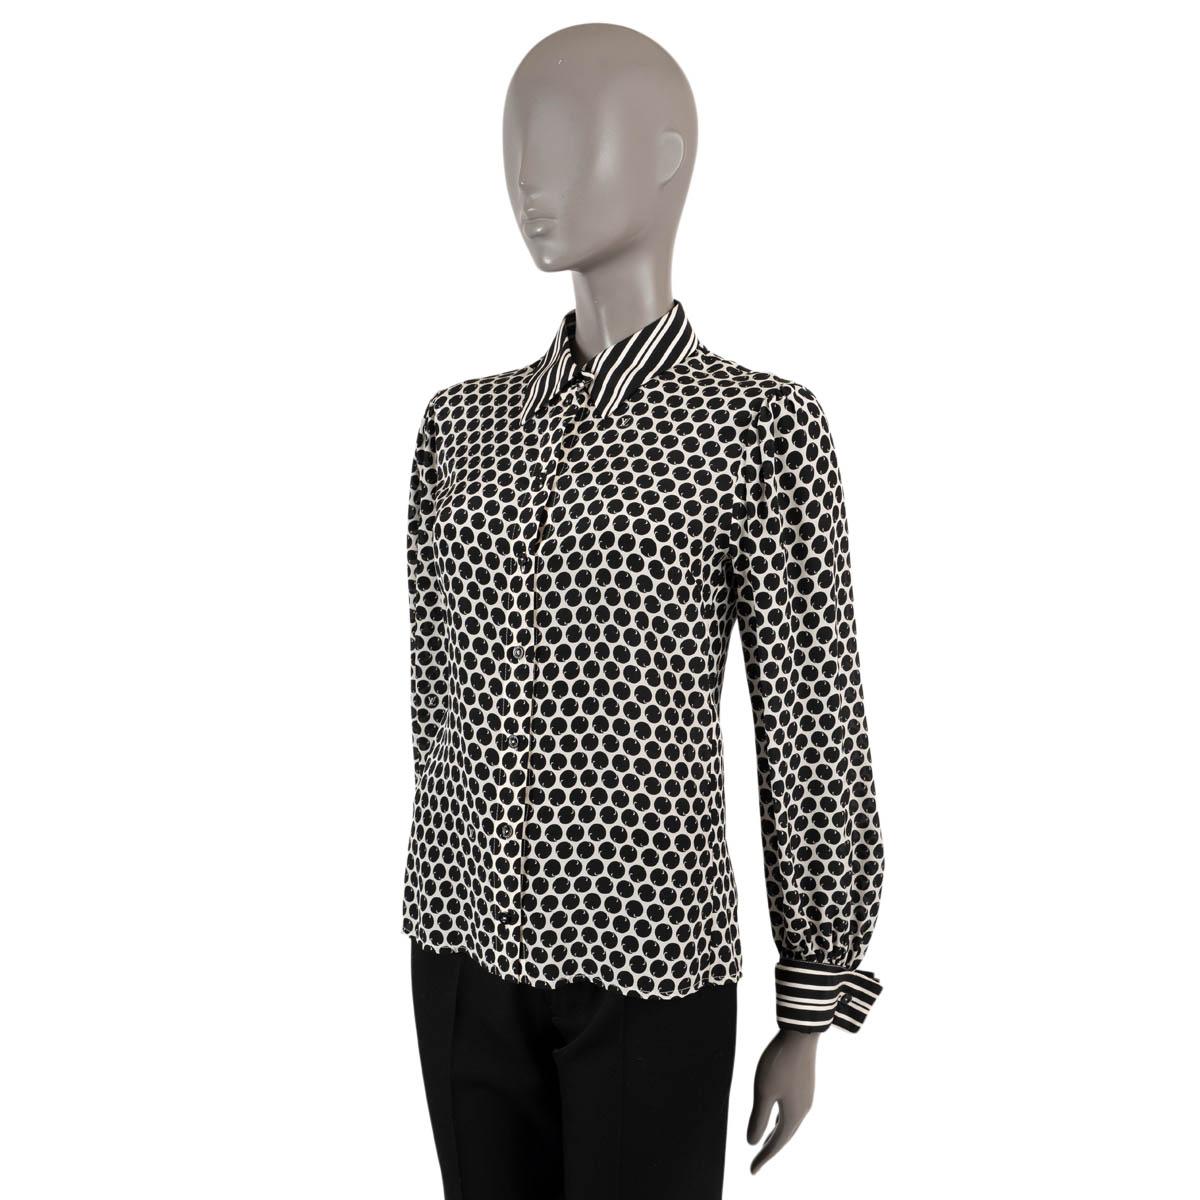 100% authentic Louis Vuitton button-up shirt in black and white silk (100%). Features a dotted print and striped collar and buttoned cuffs. Has been worn and is in excellent condition. 

2019 Resort

Measurements
Model	RW191A JHO FGBL48
Tag